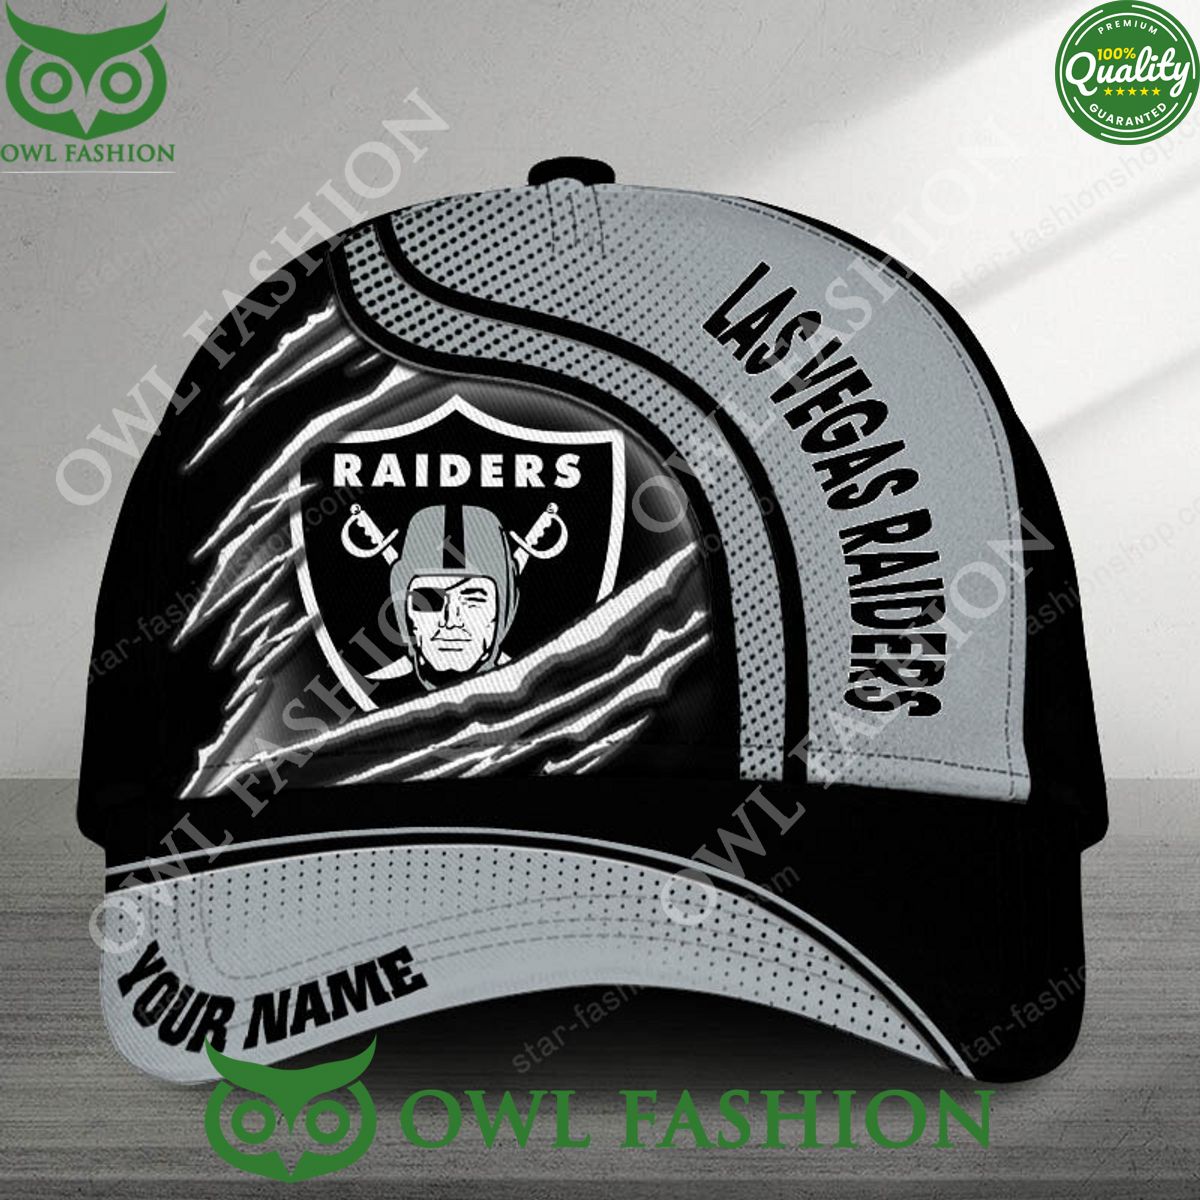 Customized NFL Las Vegas Raiders Printed Cap My favourite picture of yours